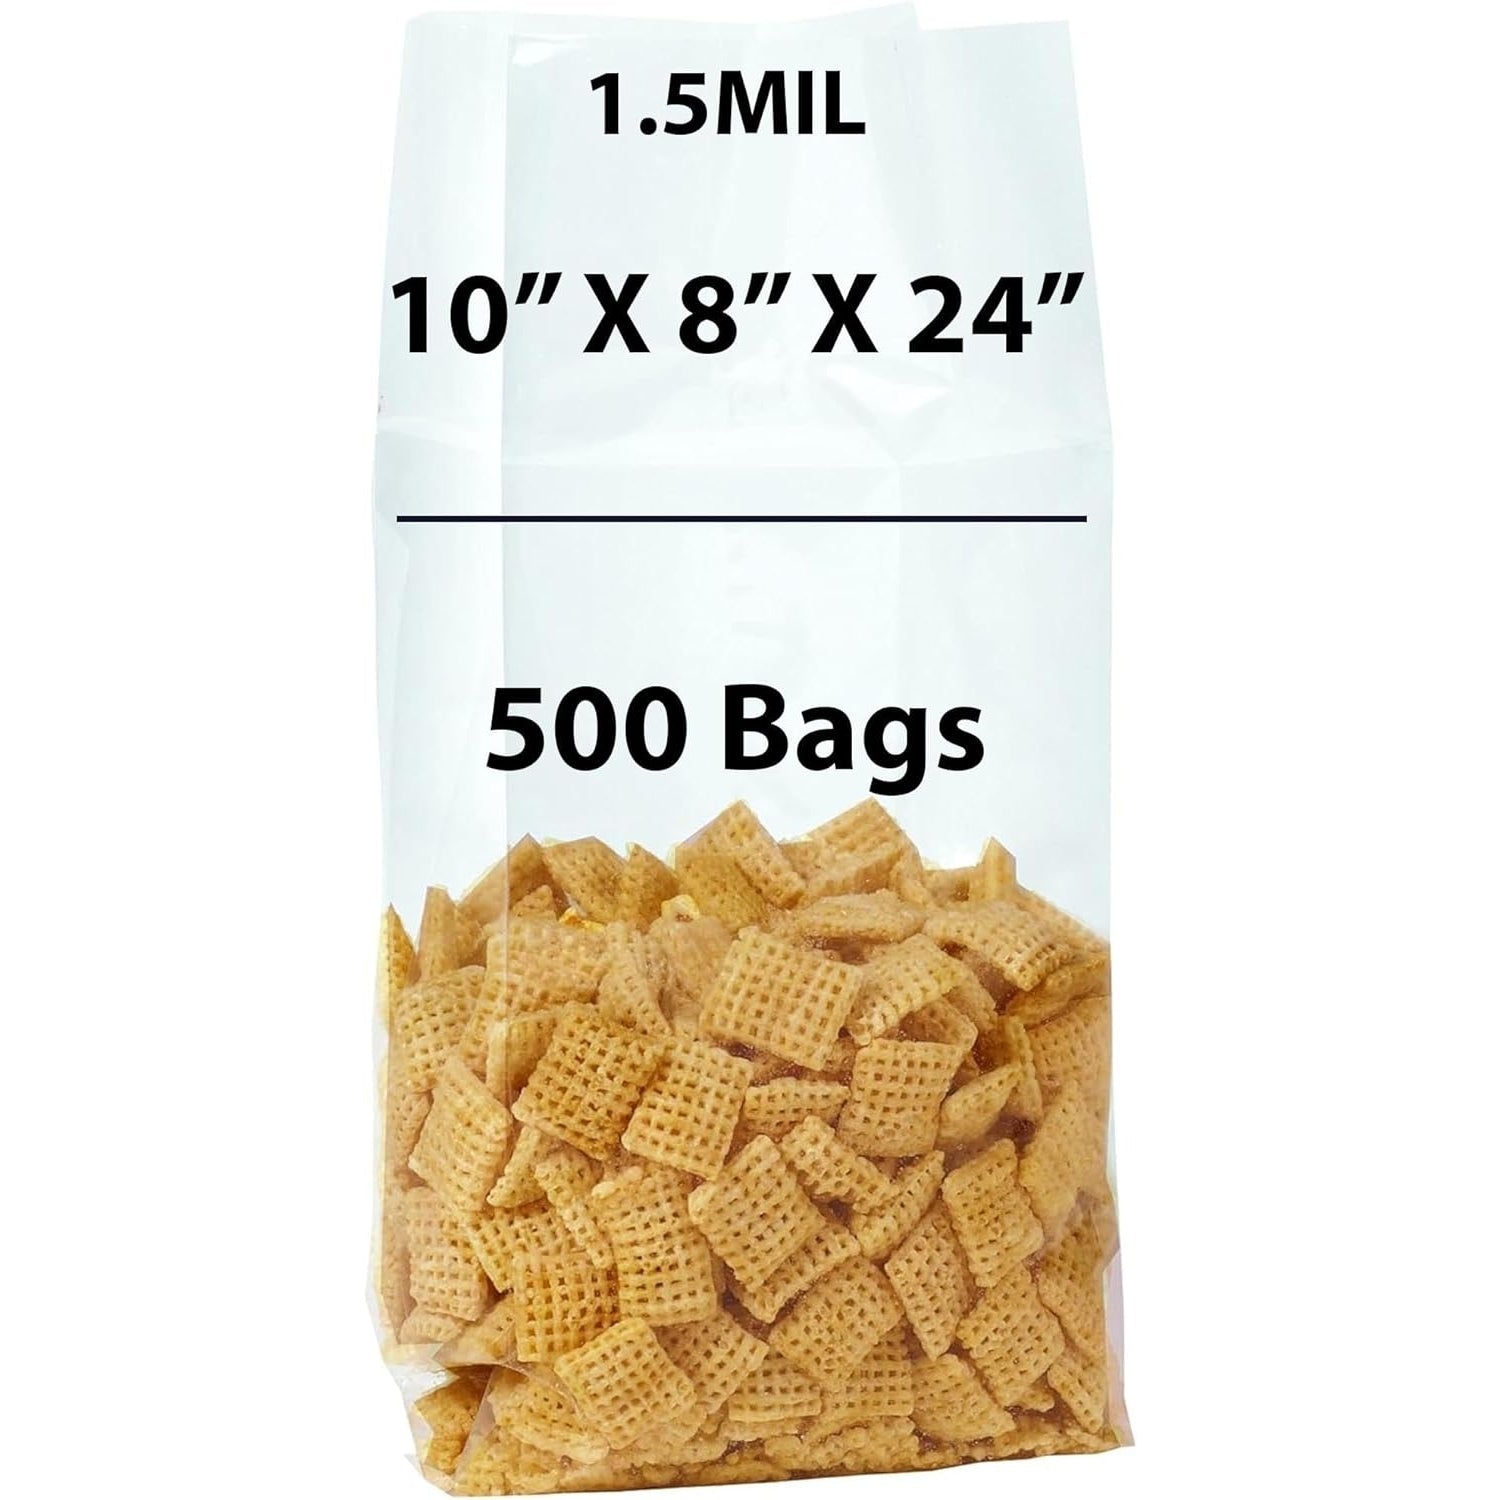 Gusseted Polypropylene Bags 1.5 Mil 10 inch X 8 inch X 24 inch Size pack of 500 bags